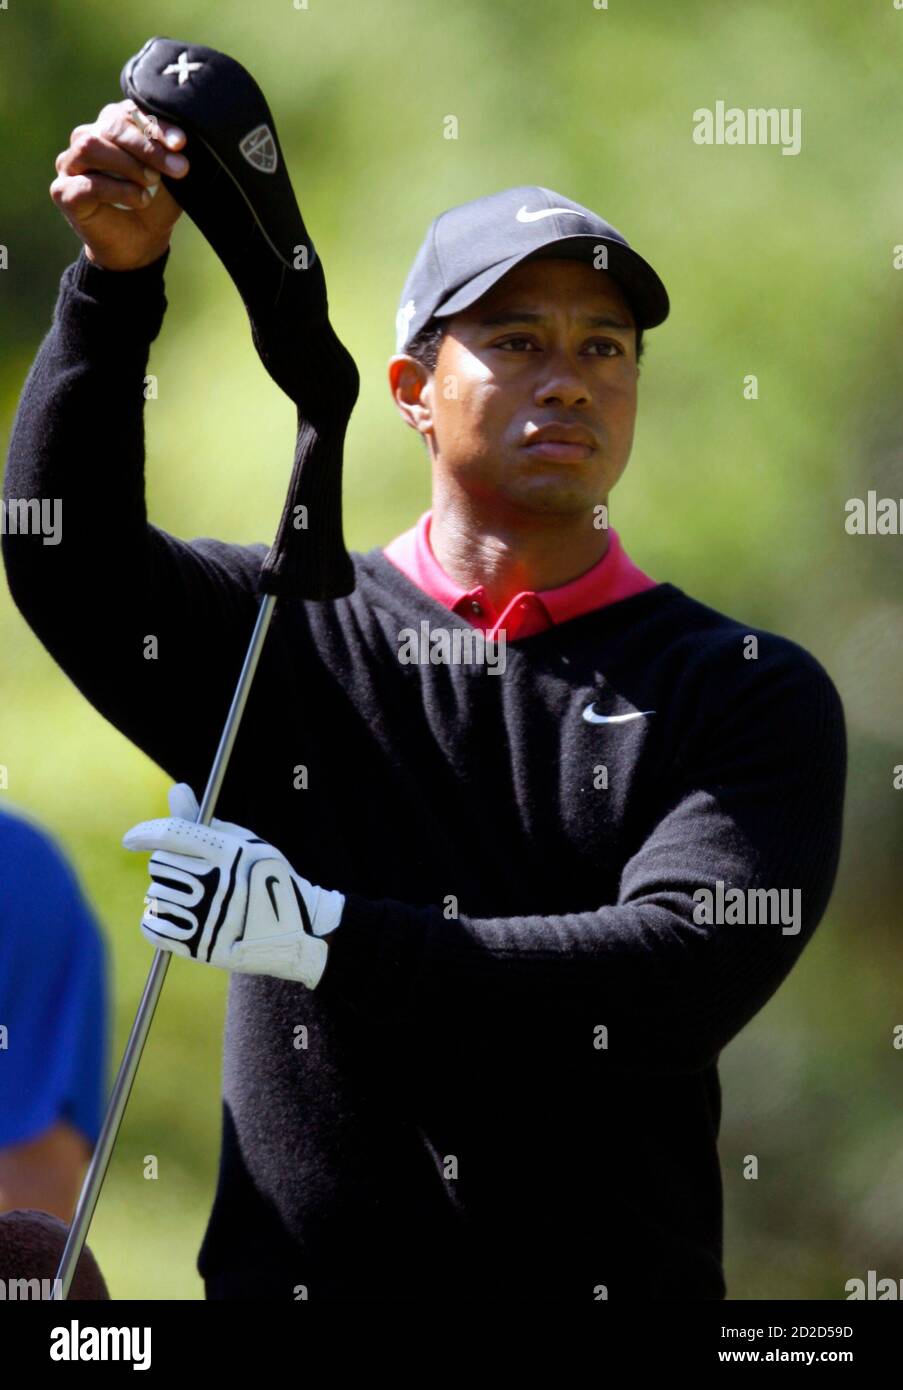 Tiger Woods of the U.S. pulls the cover off his club before hitting on the 7th tee during the final round of the 2007 Masters golf tournament at the Augusta National Golf Club in Augusta, Georgia, April 8, 2007.     REUTERS/Mike Blake (UNITED STATES) Stock Photo